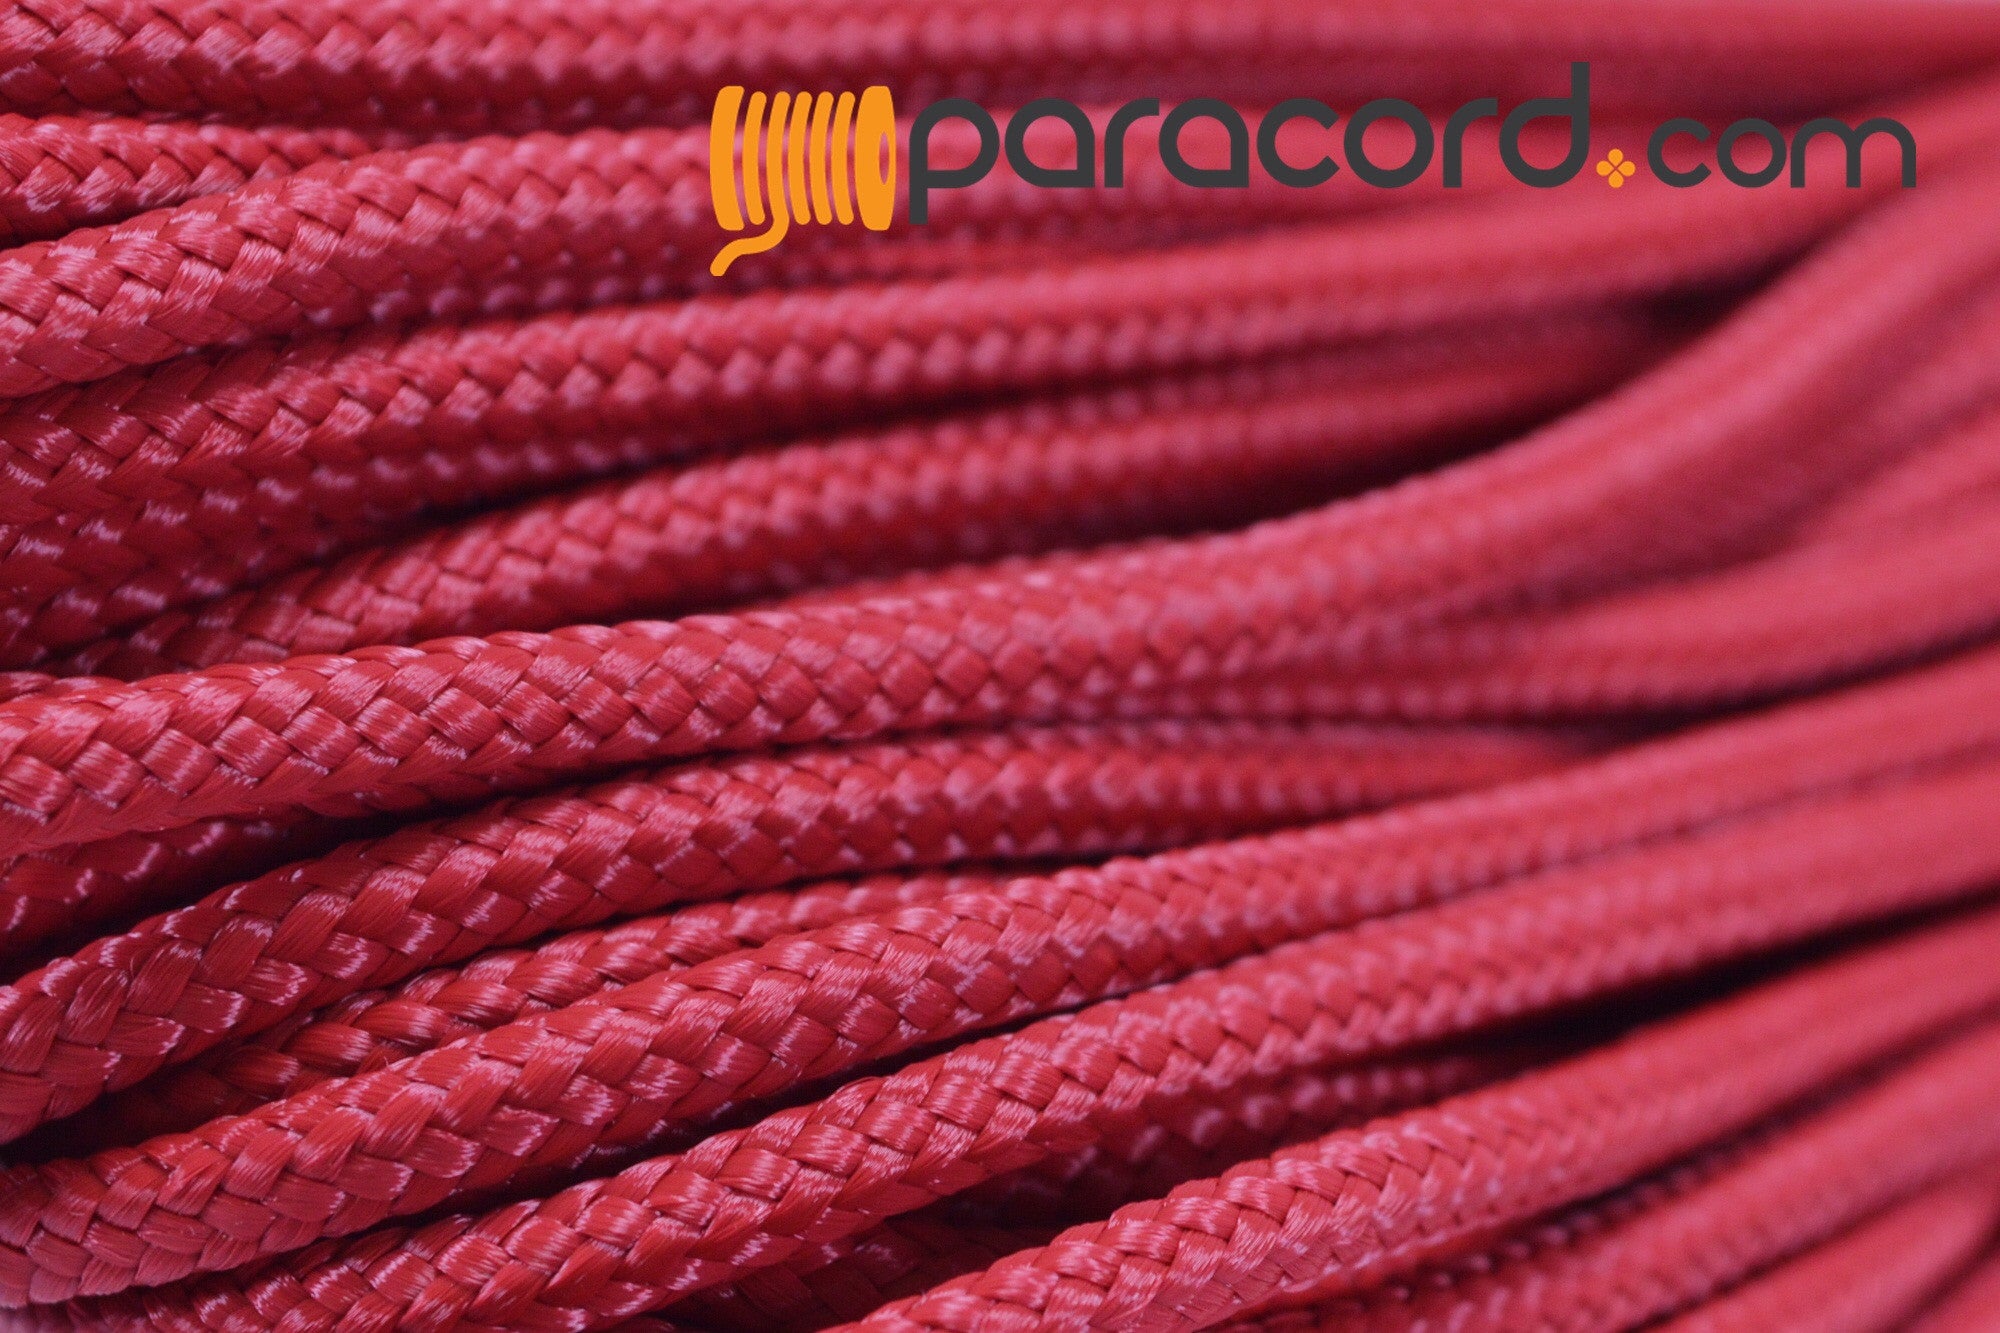 425 Paracord Crimson Red Made in the USA Nylon/Nylon. – Paracord